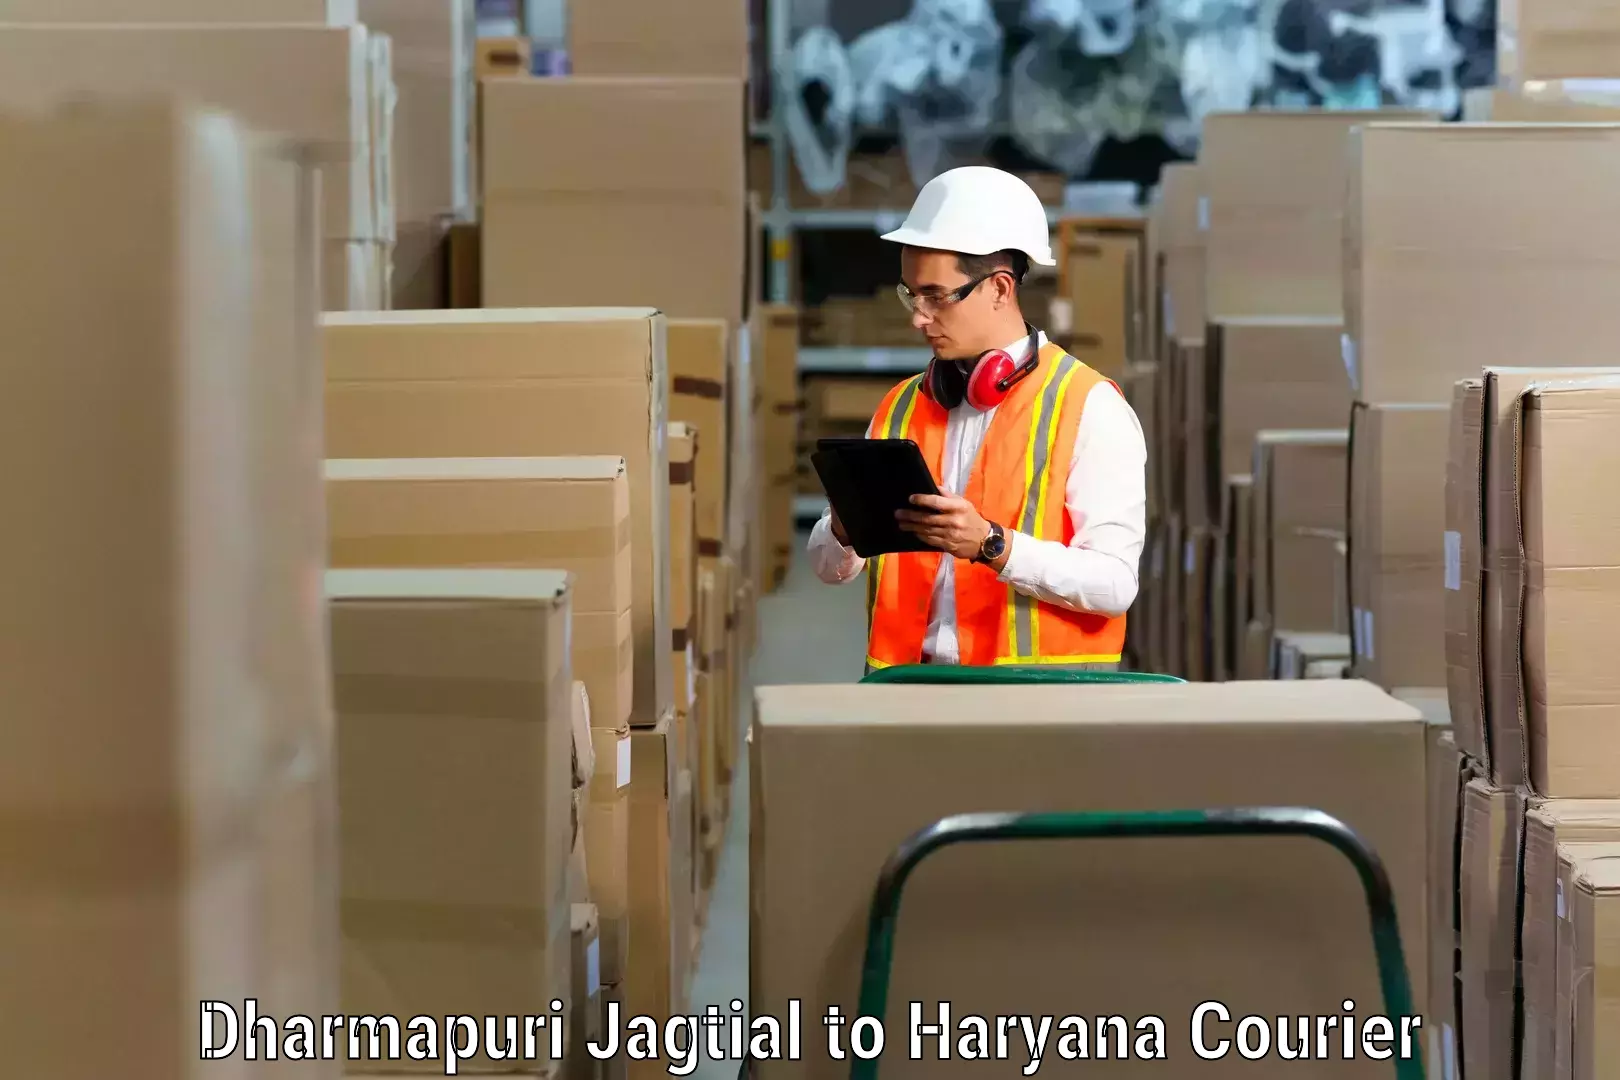 Home moving specialists Dharmapuri Jagtial to Panipat